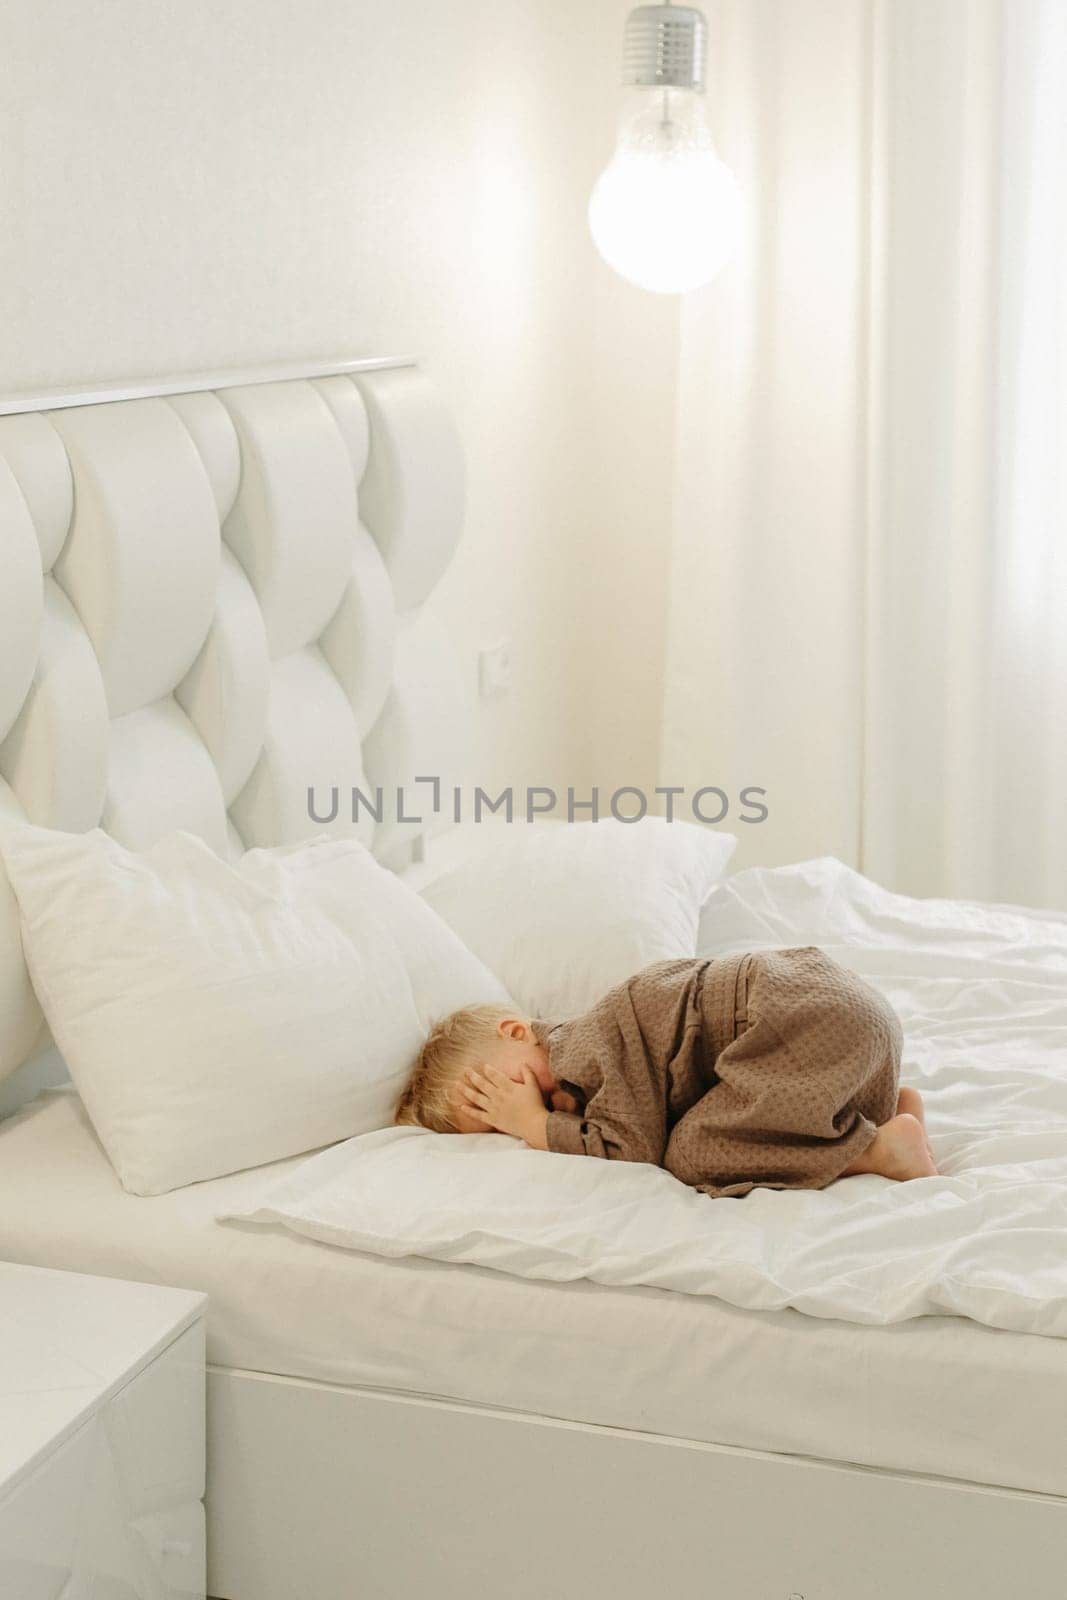 A boy in a brown bathrobe, lies on a white bed, covers his face with his hands.